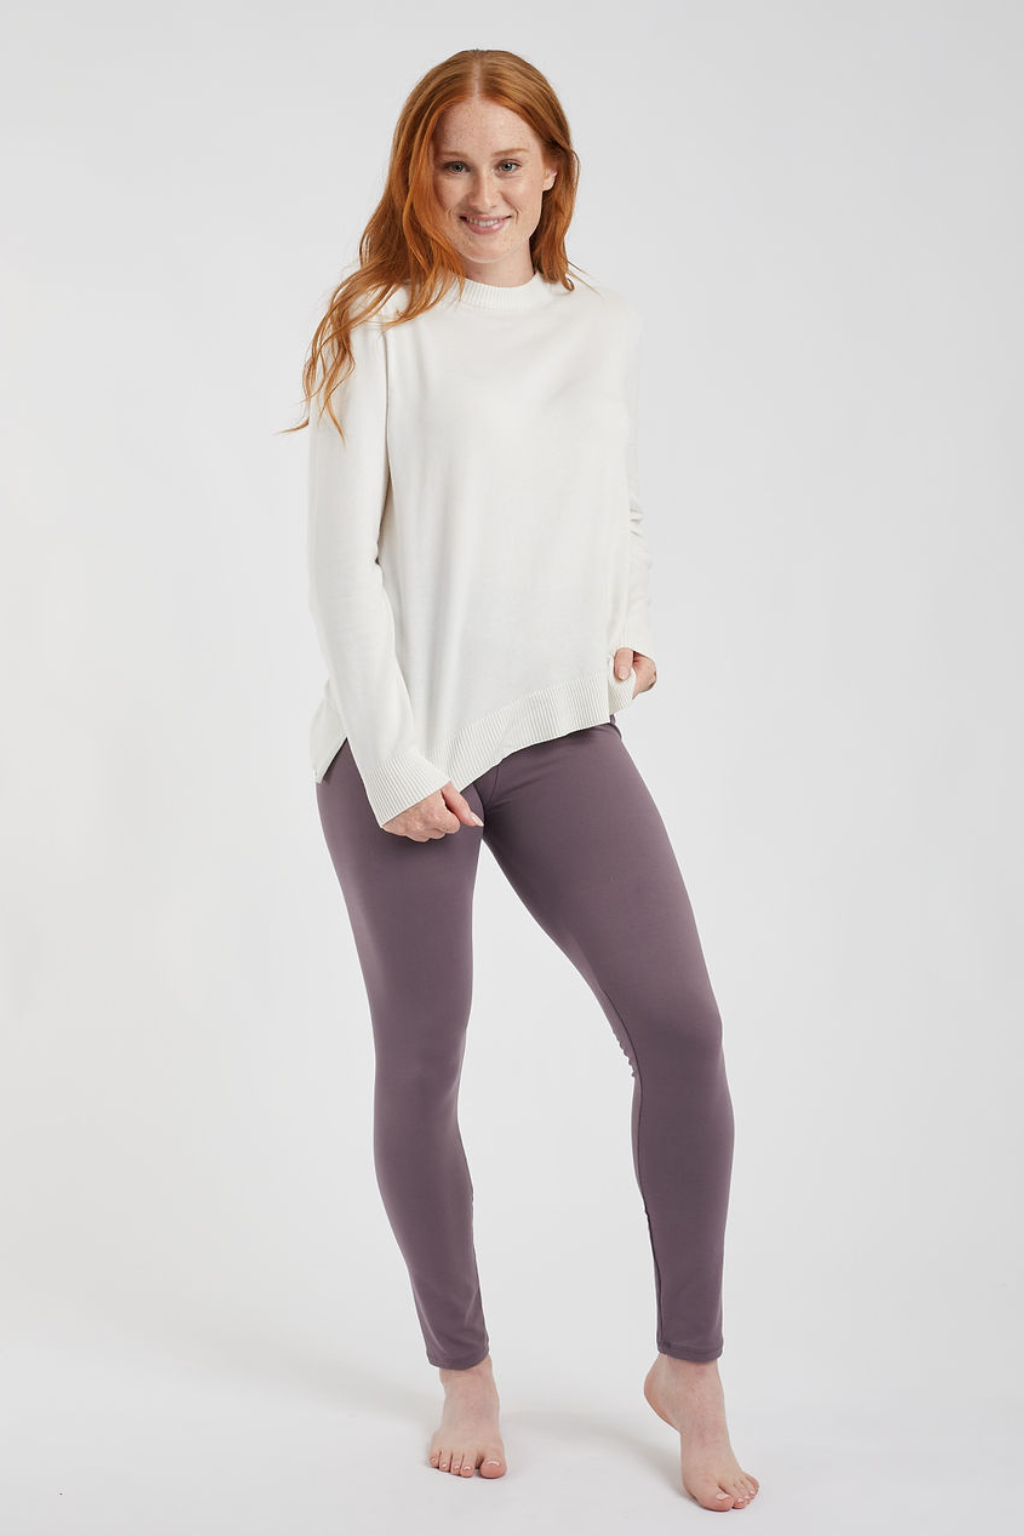 Stay warm and cozy all season long with our Cozy Lined Leggings